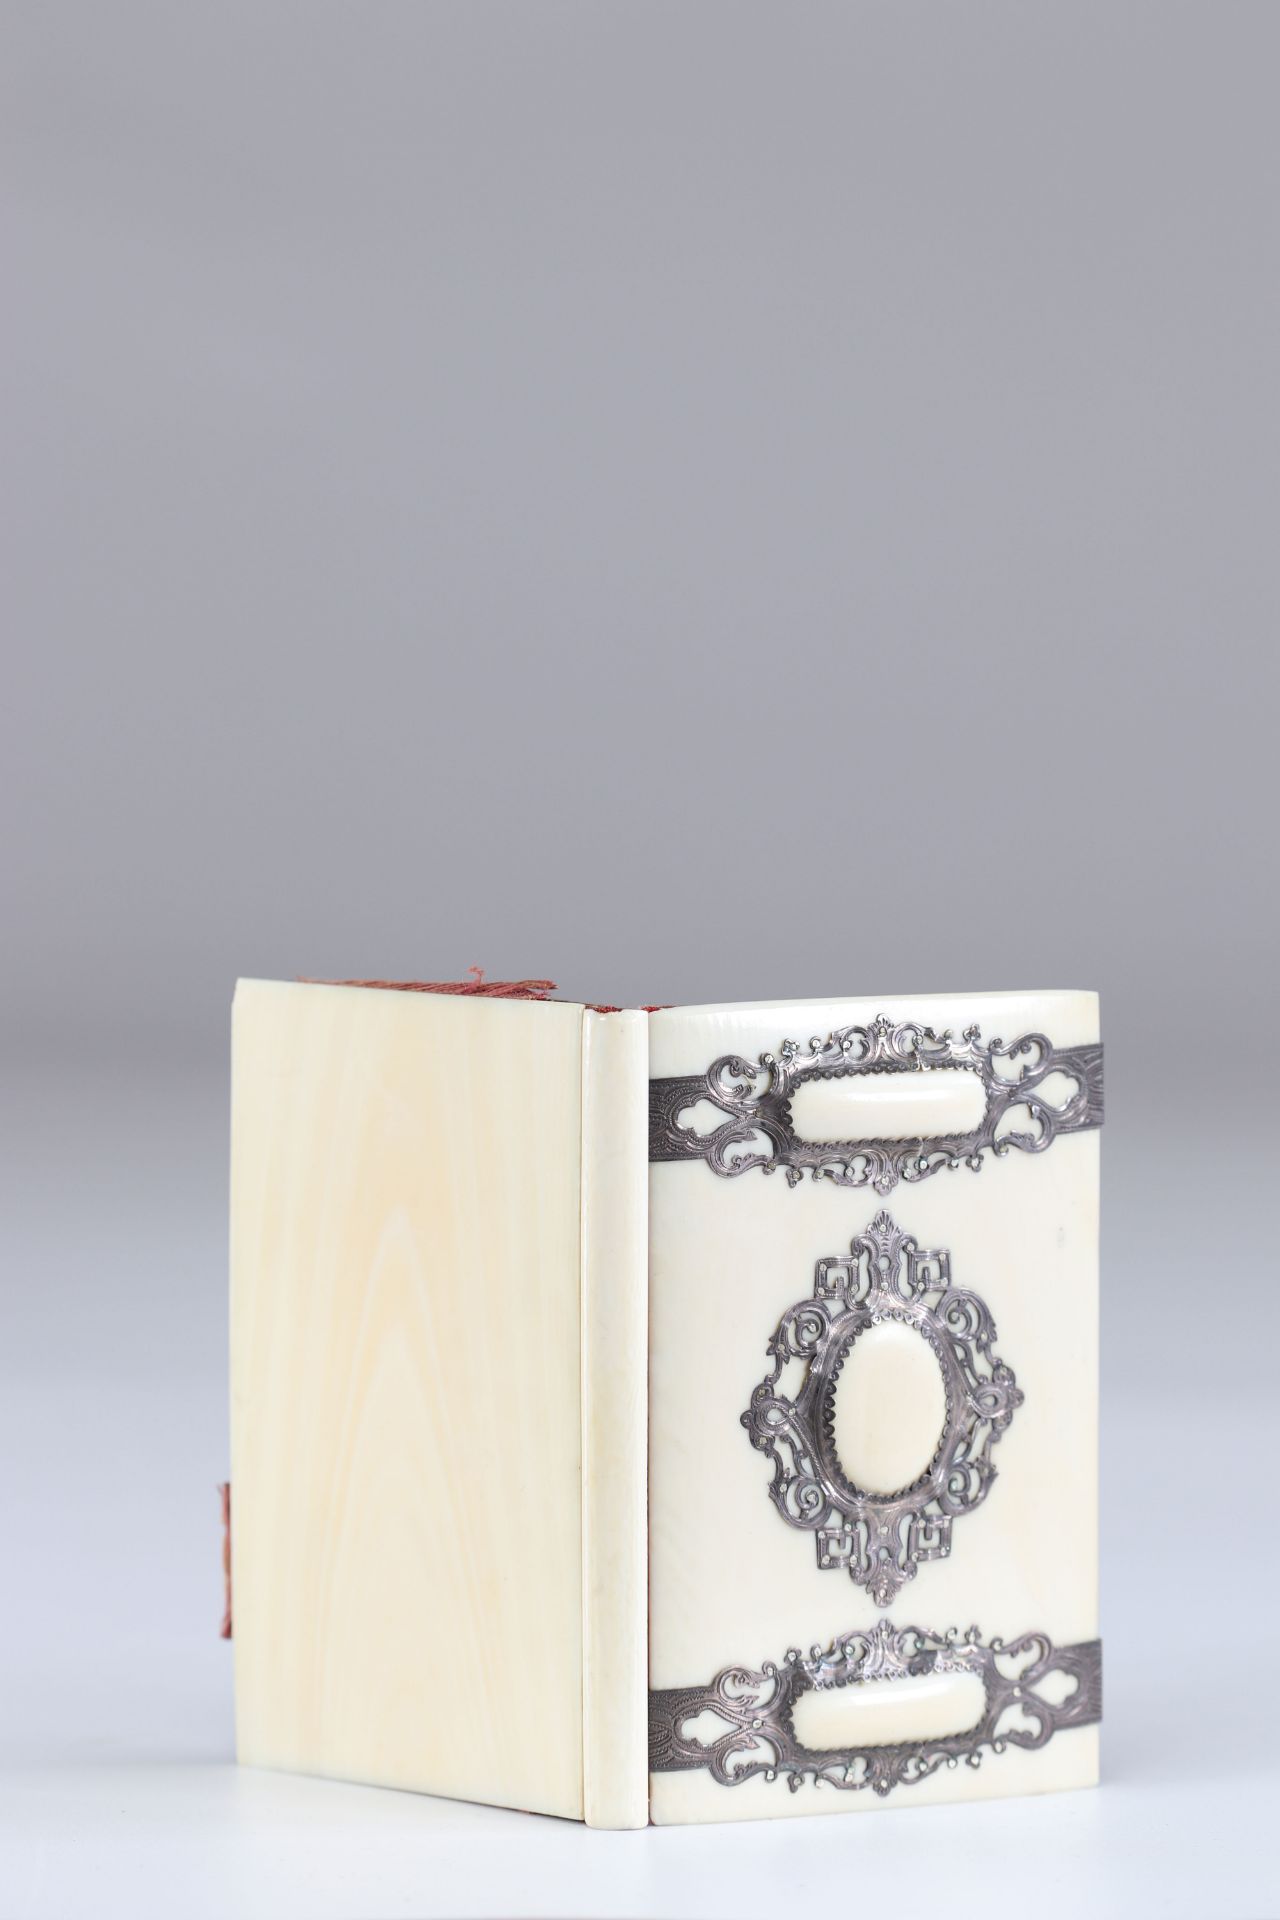 19th ivory and silver prom notebook - Image 2 of 2